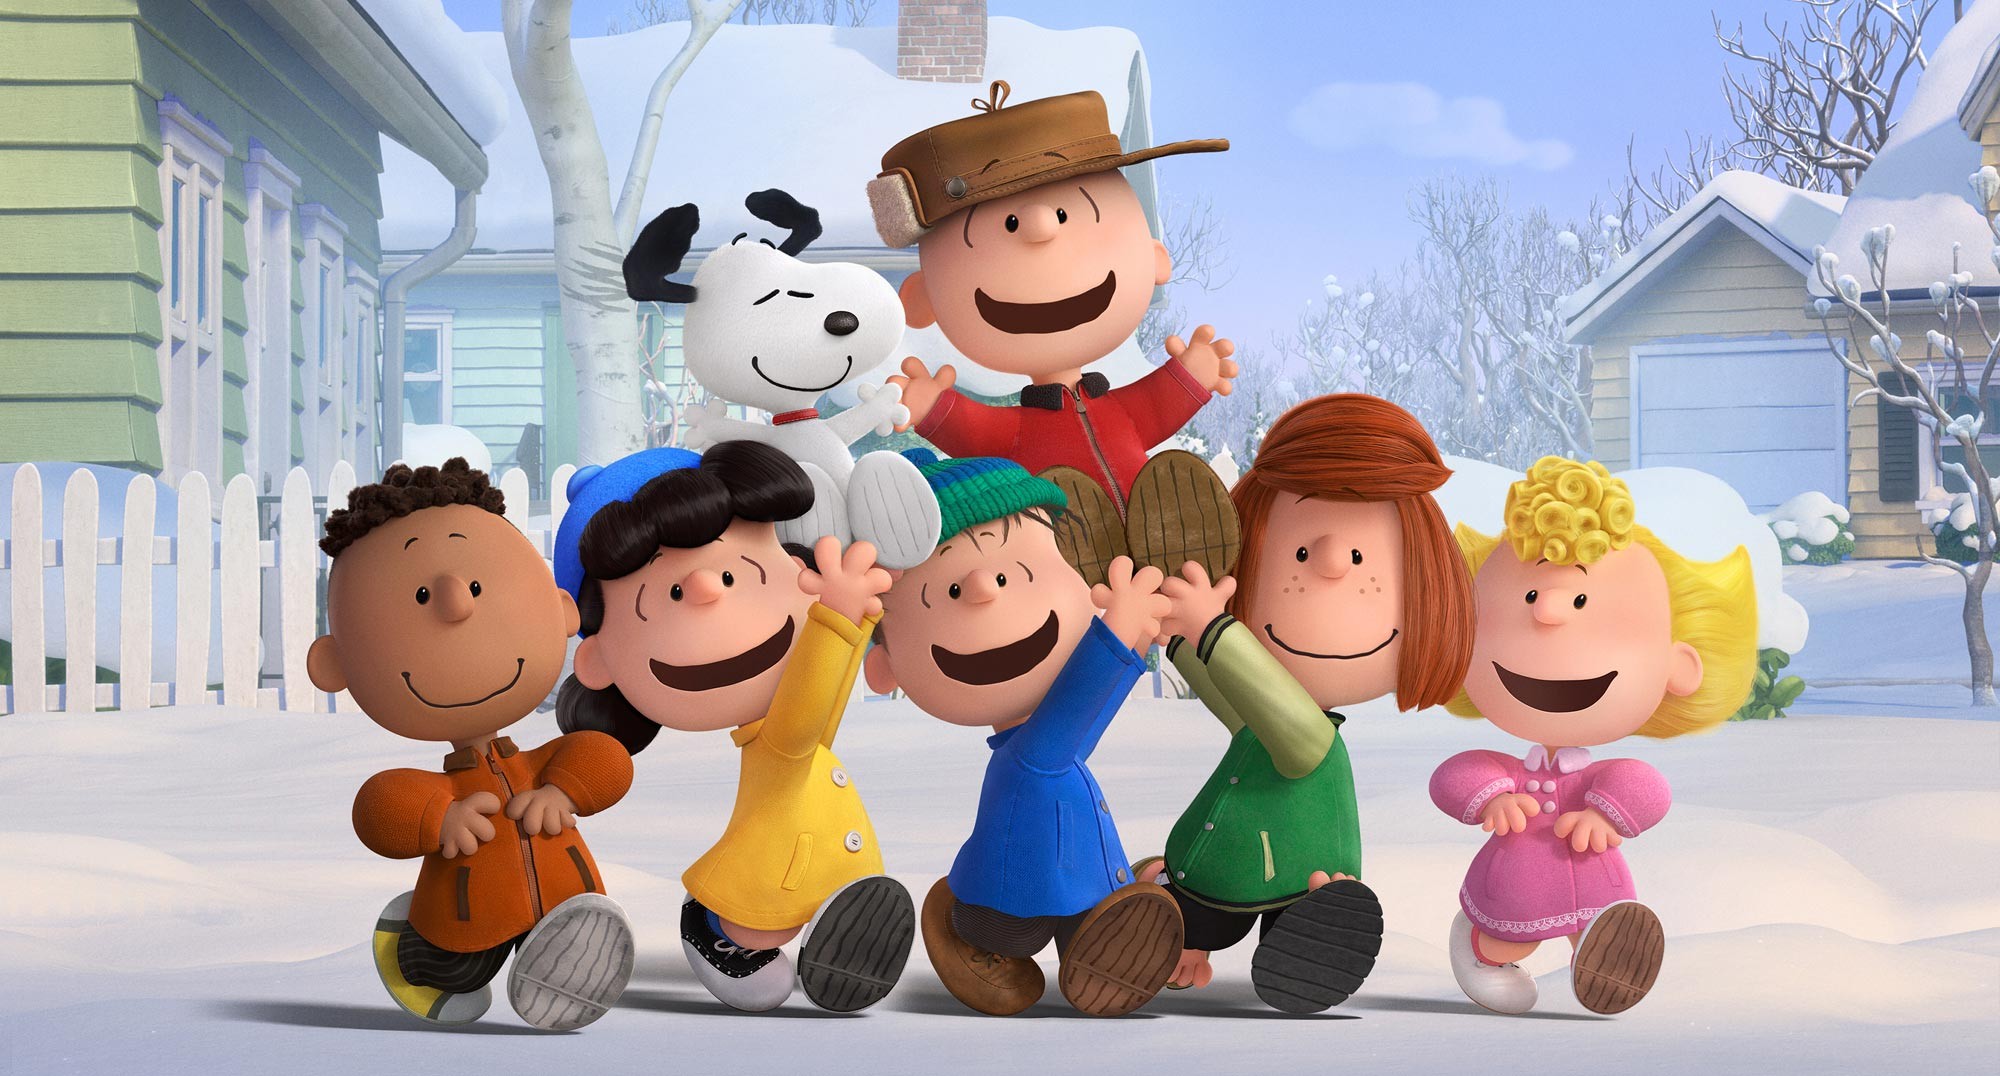 Franklin, Lucy, Snoopy, Linus, Charlie Brown, Peppermint Patty and Sally from